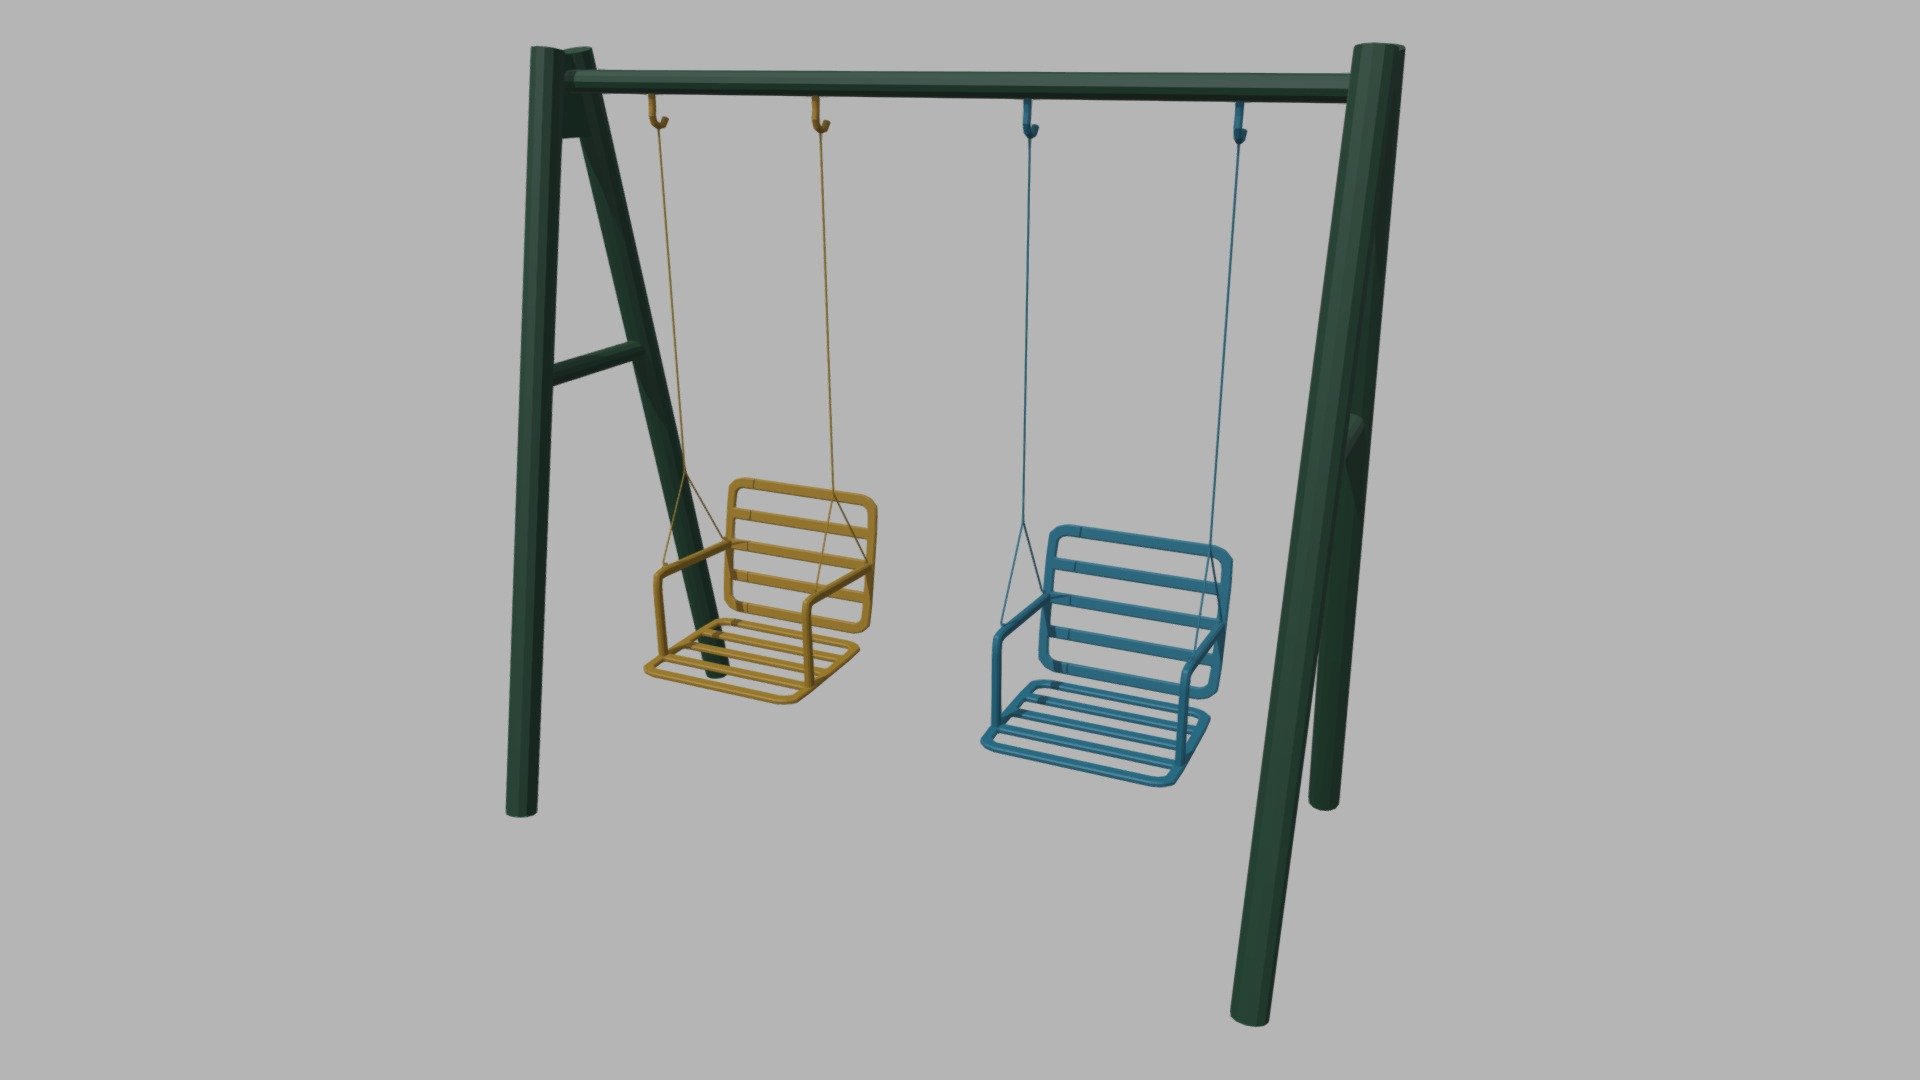 This model contains a Low Poly Swing based on real swing from a children playground which i modeled in Maya 2018. This model is perfect to create a new great scene with different low poly items that will be ready to purchase on my profile.

The model is ready in one unique UV with all the different parts of the swing. The model is ready in .blend, .mb , .obj, .fbx, .dae and the original substance file.

If you need any kind of help contact me, i will help you with everything i can. If you like the model please give me some feedback, I would appreciate it.

Don’t doubt on contacting me, i would be very happy to help. If you experience any kind of difficulties, be sure to contact me and i will help you. Sincerely Yours, ViperJr3D - Low Poly Swing - Buy Royalty Free 3D model by ViperJr3D 3d model